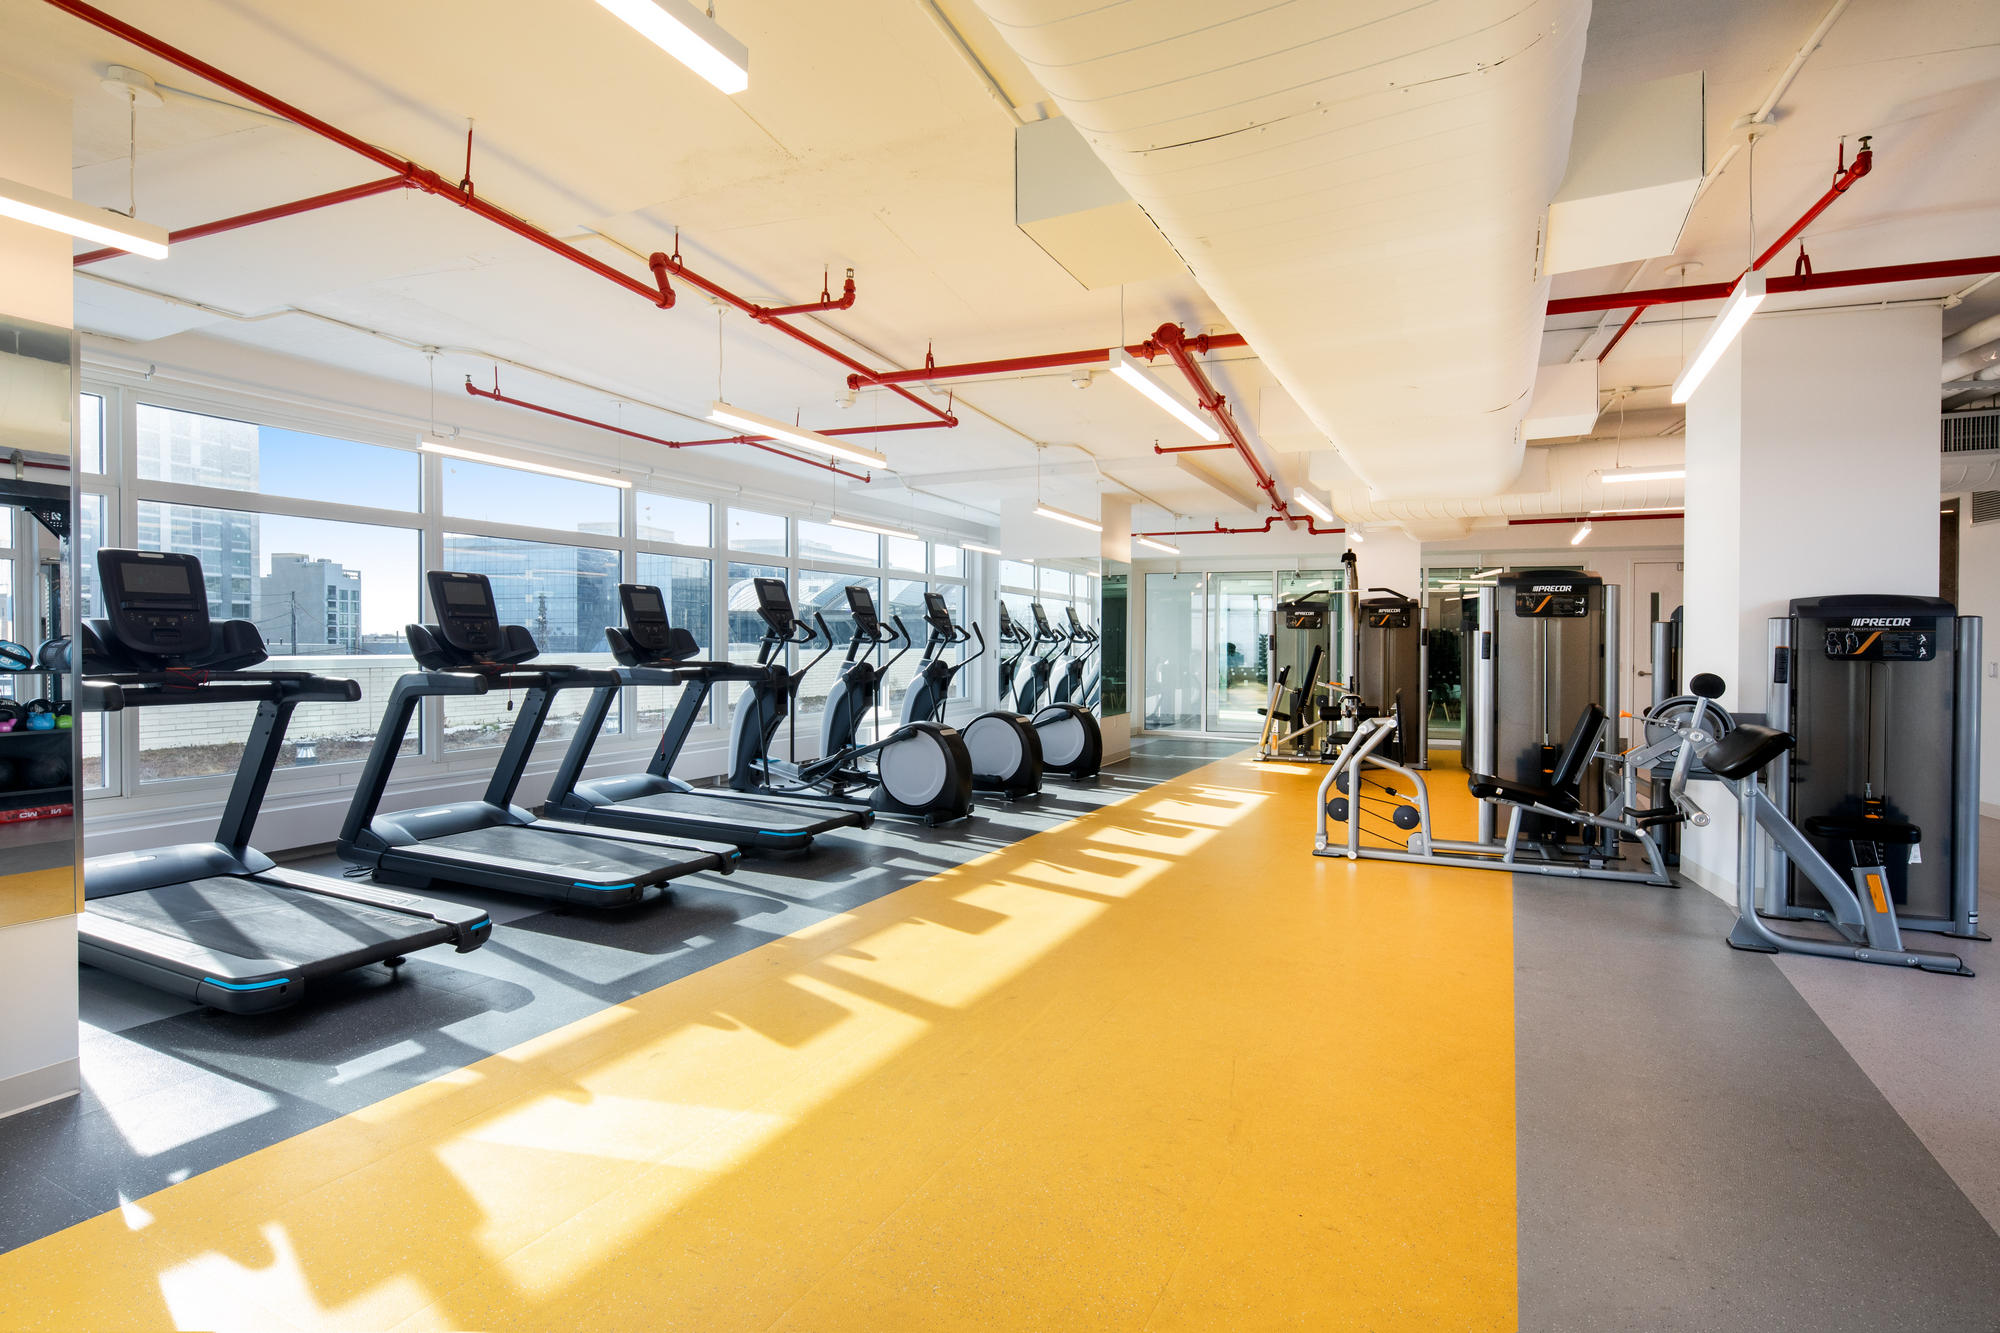 Large fitness center with grey and yellow floors, large windows, weight machines, numerous treadmills and elliptical machines